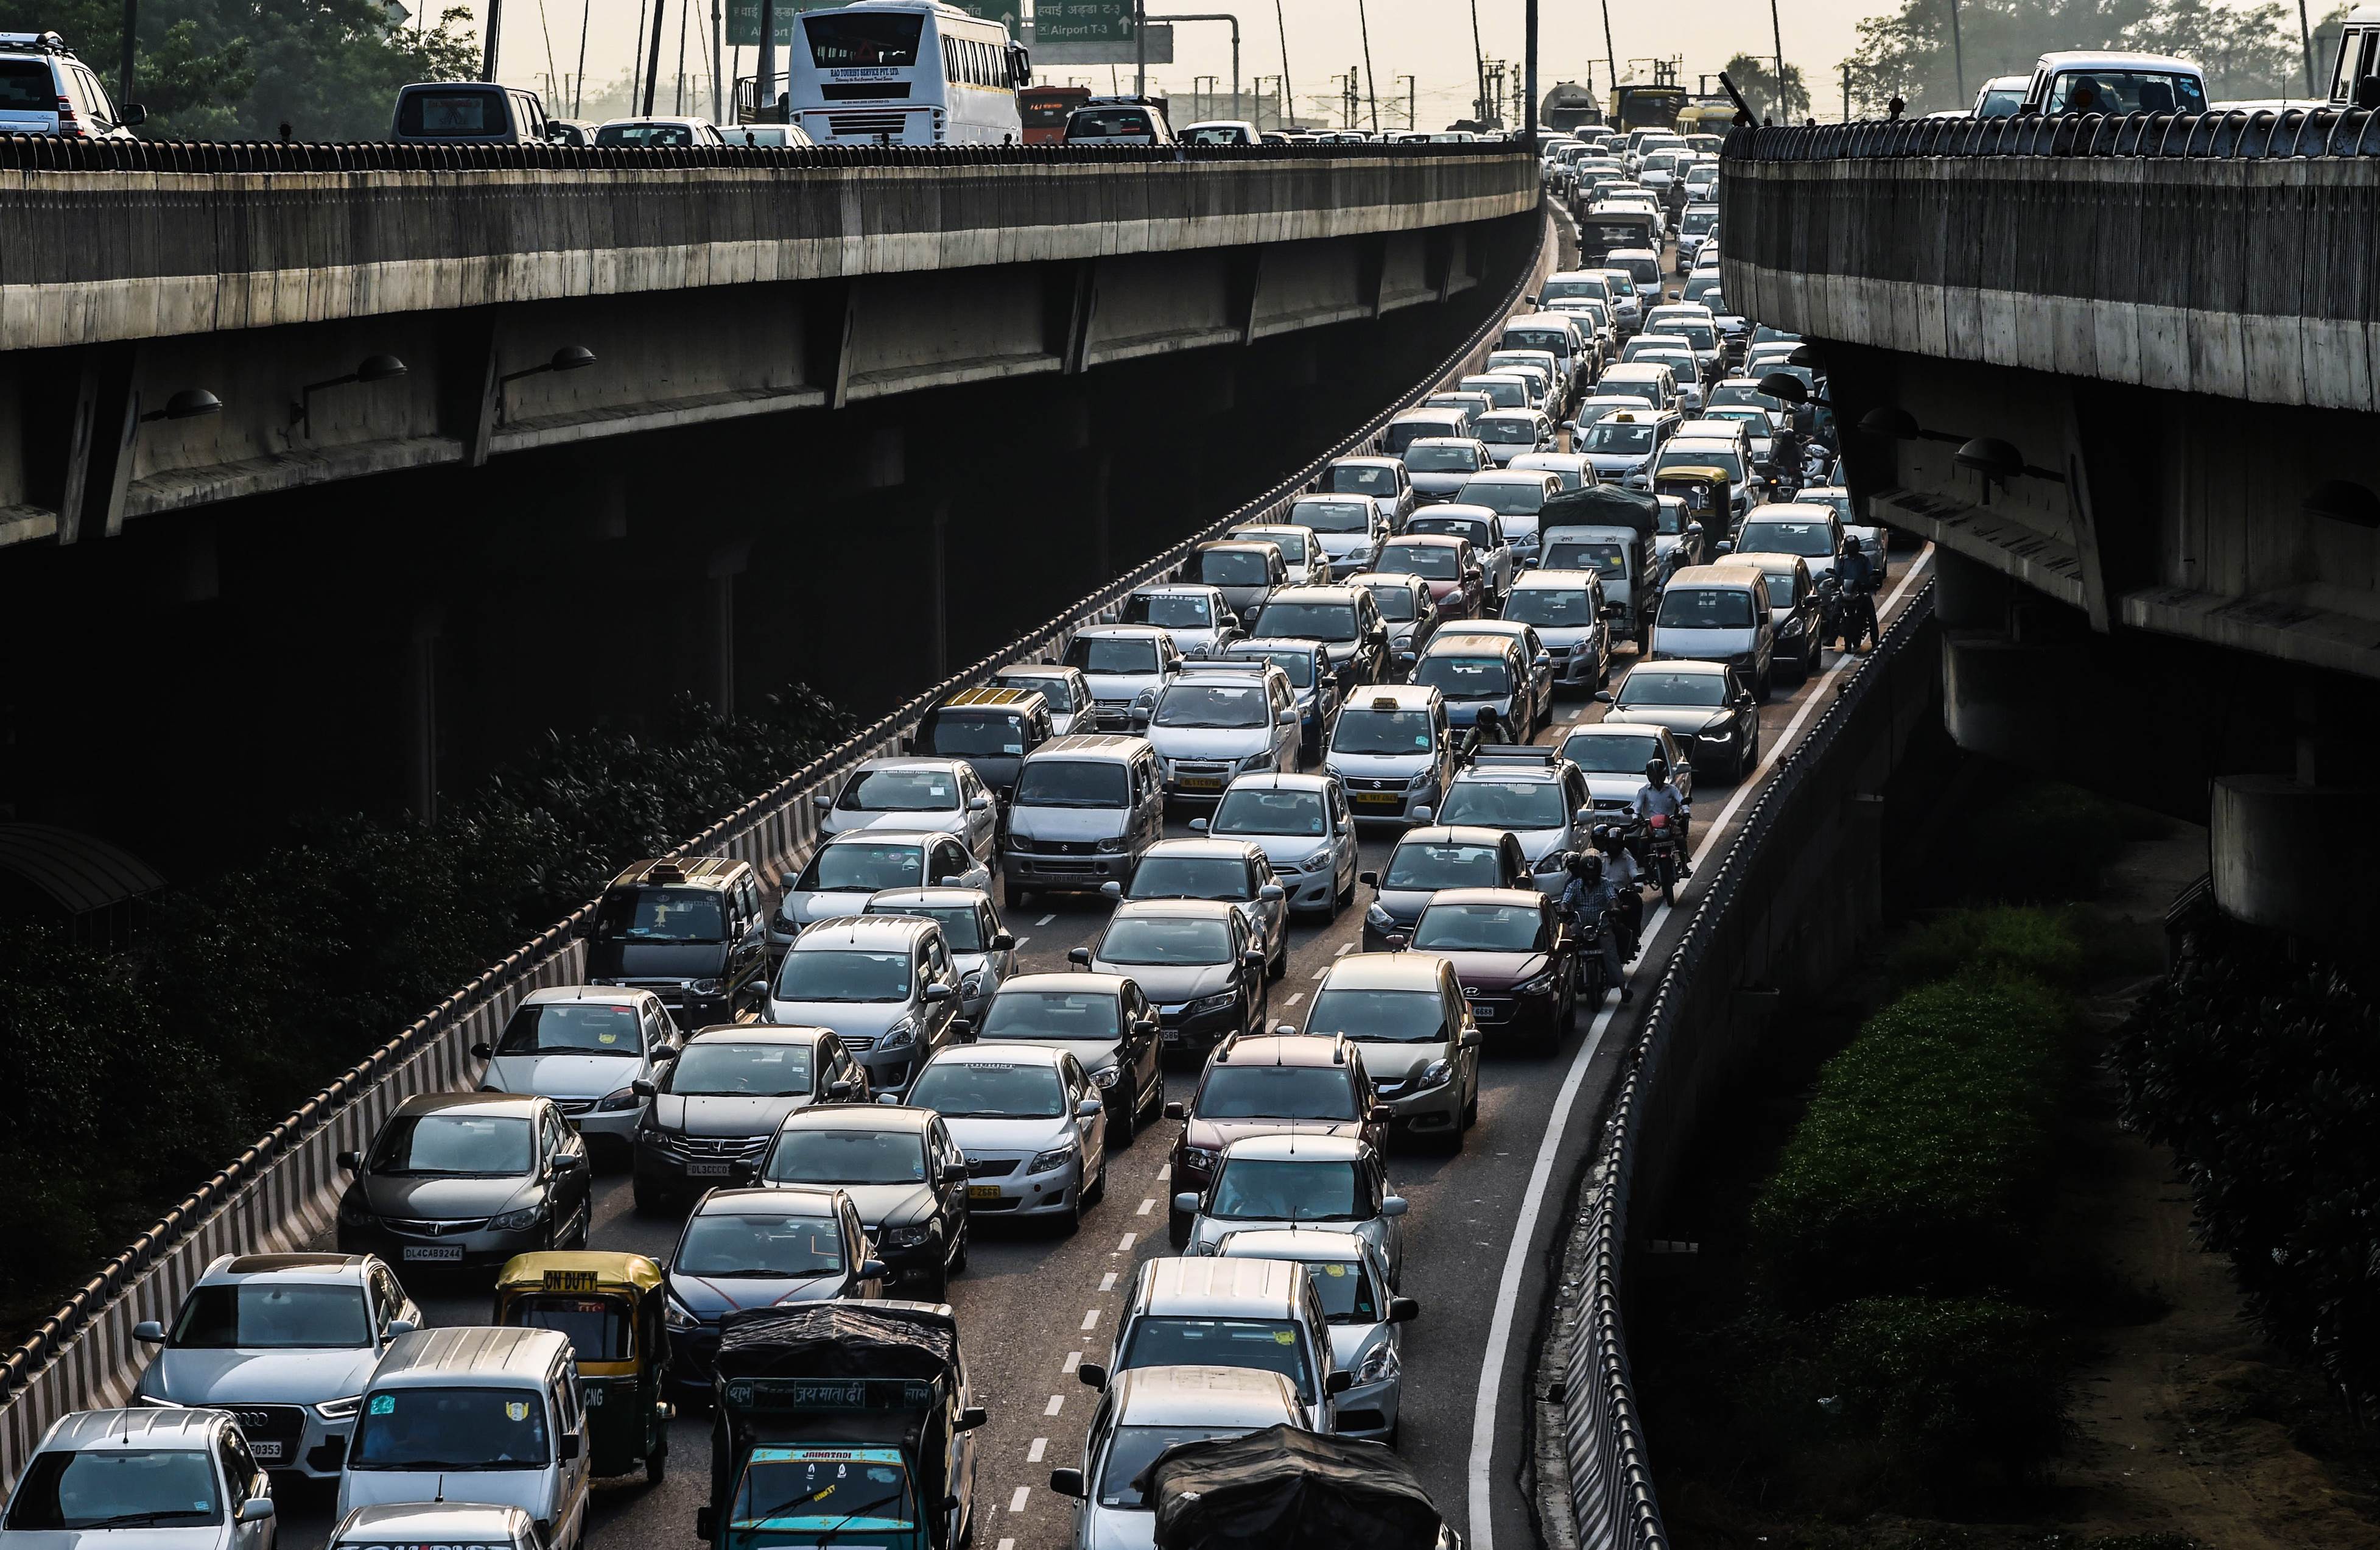 To go with Climate-warming-UN-COP21-India,FOCUS by Trudy Harris In this photo taken on October 15, 2015, a stream of cars backs up on an exit to a highway in New Delhi. India's capital, with 18 million residents, has the world's most polluted air with six times the amount of small particulate matter (pm2.5) than what is considered safe, according to the World Health Organization (WHO). The air's hazardous amount of pm2.5 can reach deep into the lungs and enter the blood, causing serious long term health effect, with the WHO warning India has the world's highest death rate from chronic respiratory diseases. India, home to 13 of the world's top 20 polluted cities, is also the third largest emitter of greenhouse gases behind the United States and China. In Delhi, the air pollution is due to vehicle traffic including cargo trucks running on low-grade diesel, individual fires that residents burn in winter, crop being burnt by farmers in neighboring states, and construction site dust. Burnin